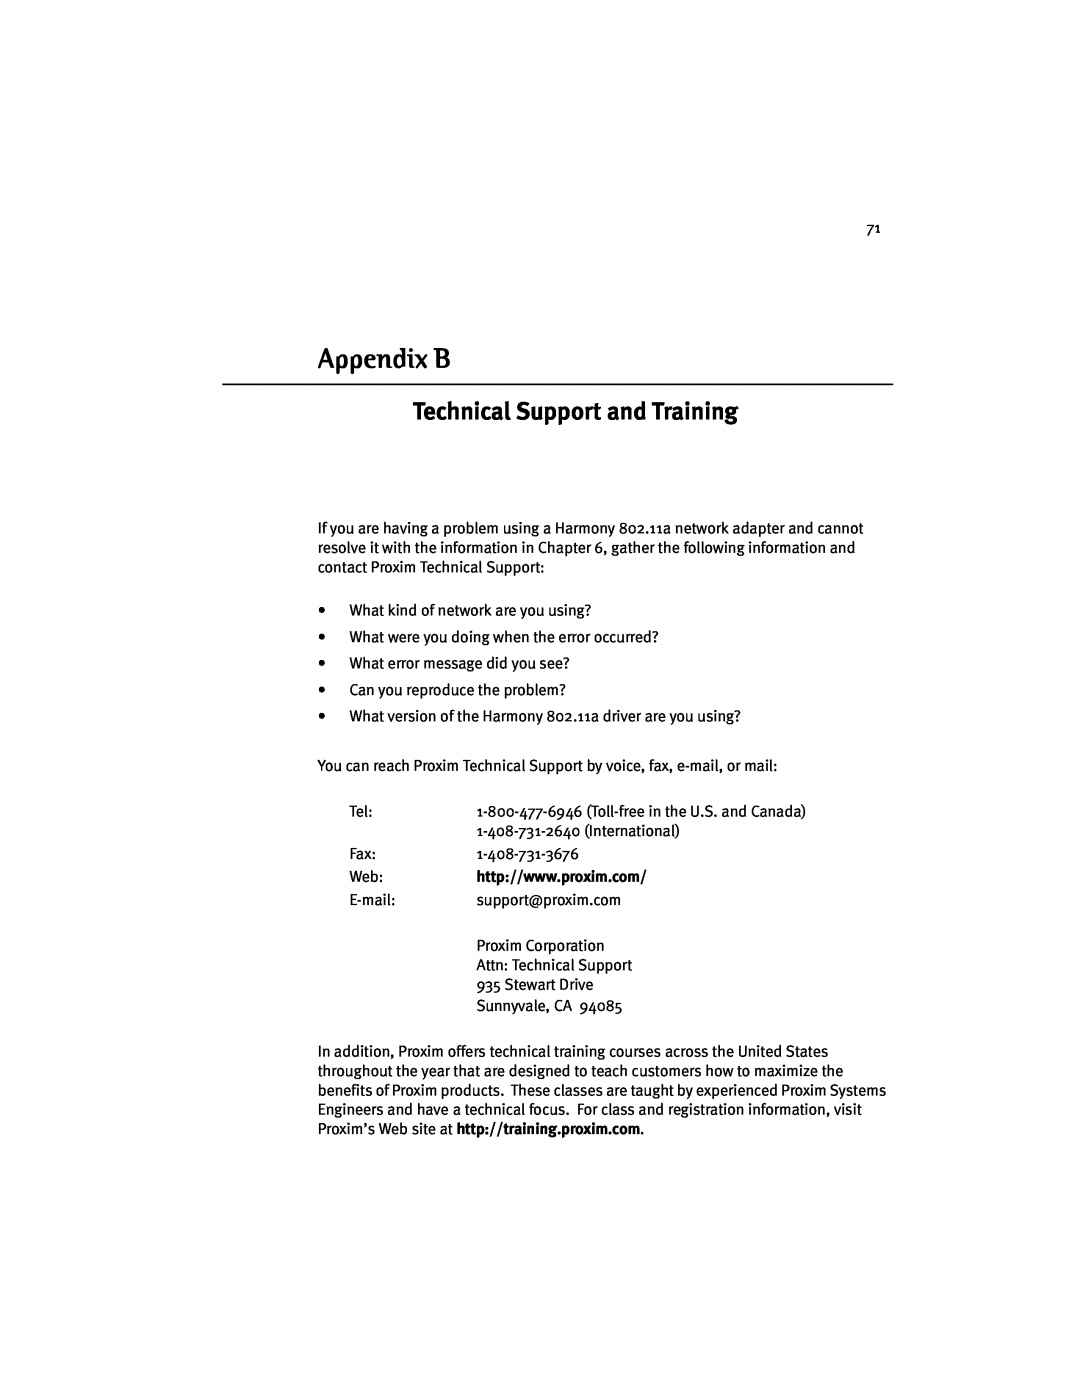 Harmony House 802.11a manual Appendix B, Technical Support and Training 